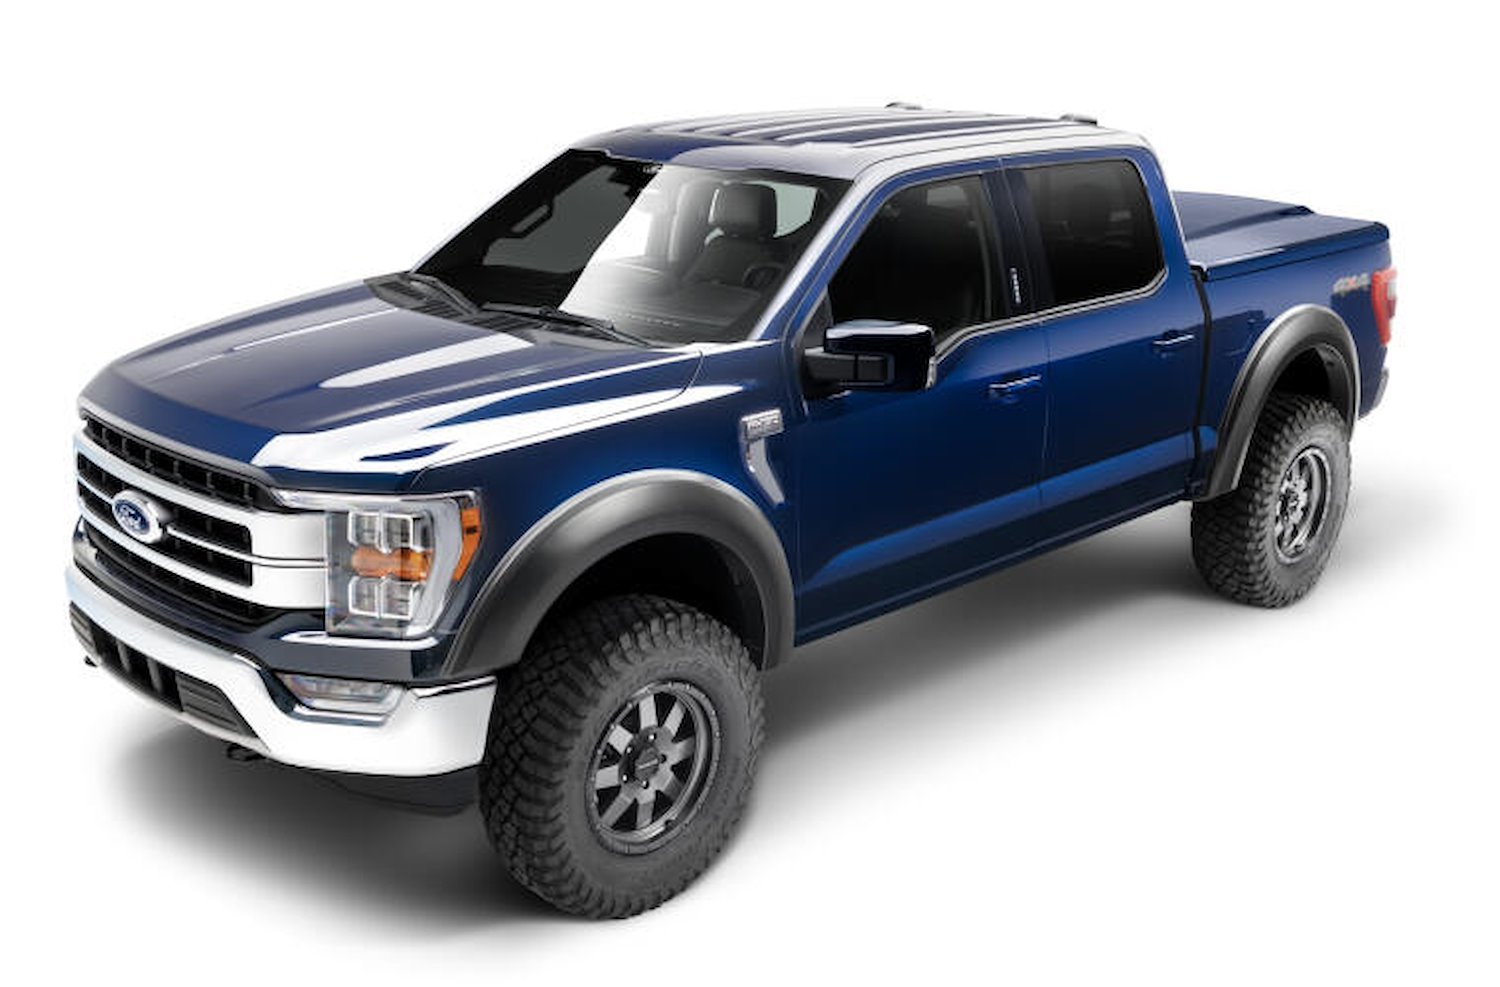 Extend-A-Fender Front & Rear Flares for Select Ford F-150 Trucks - Matte Black Smooth Finish